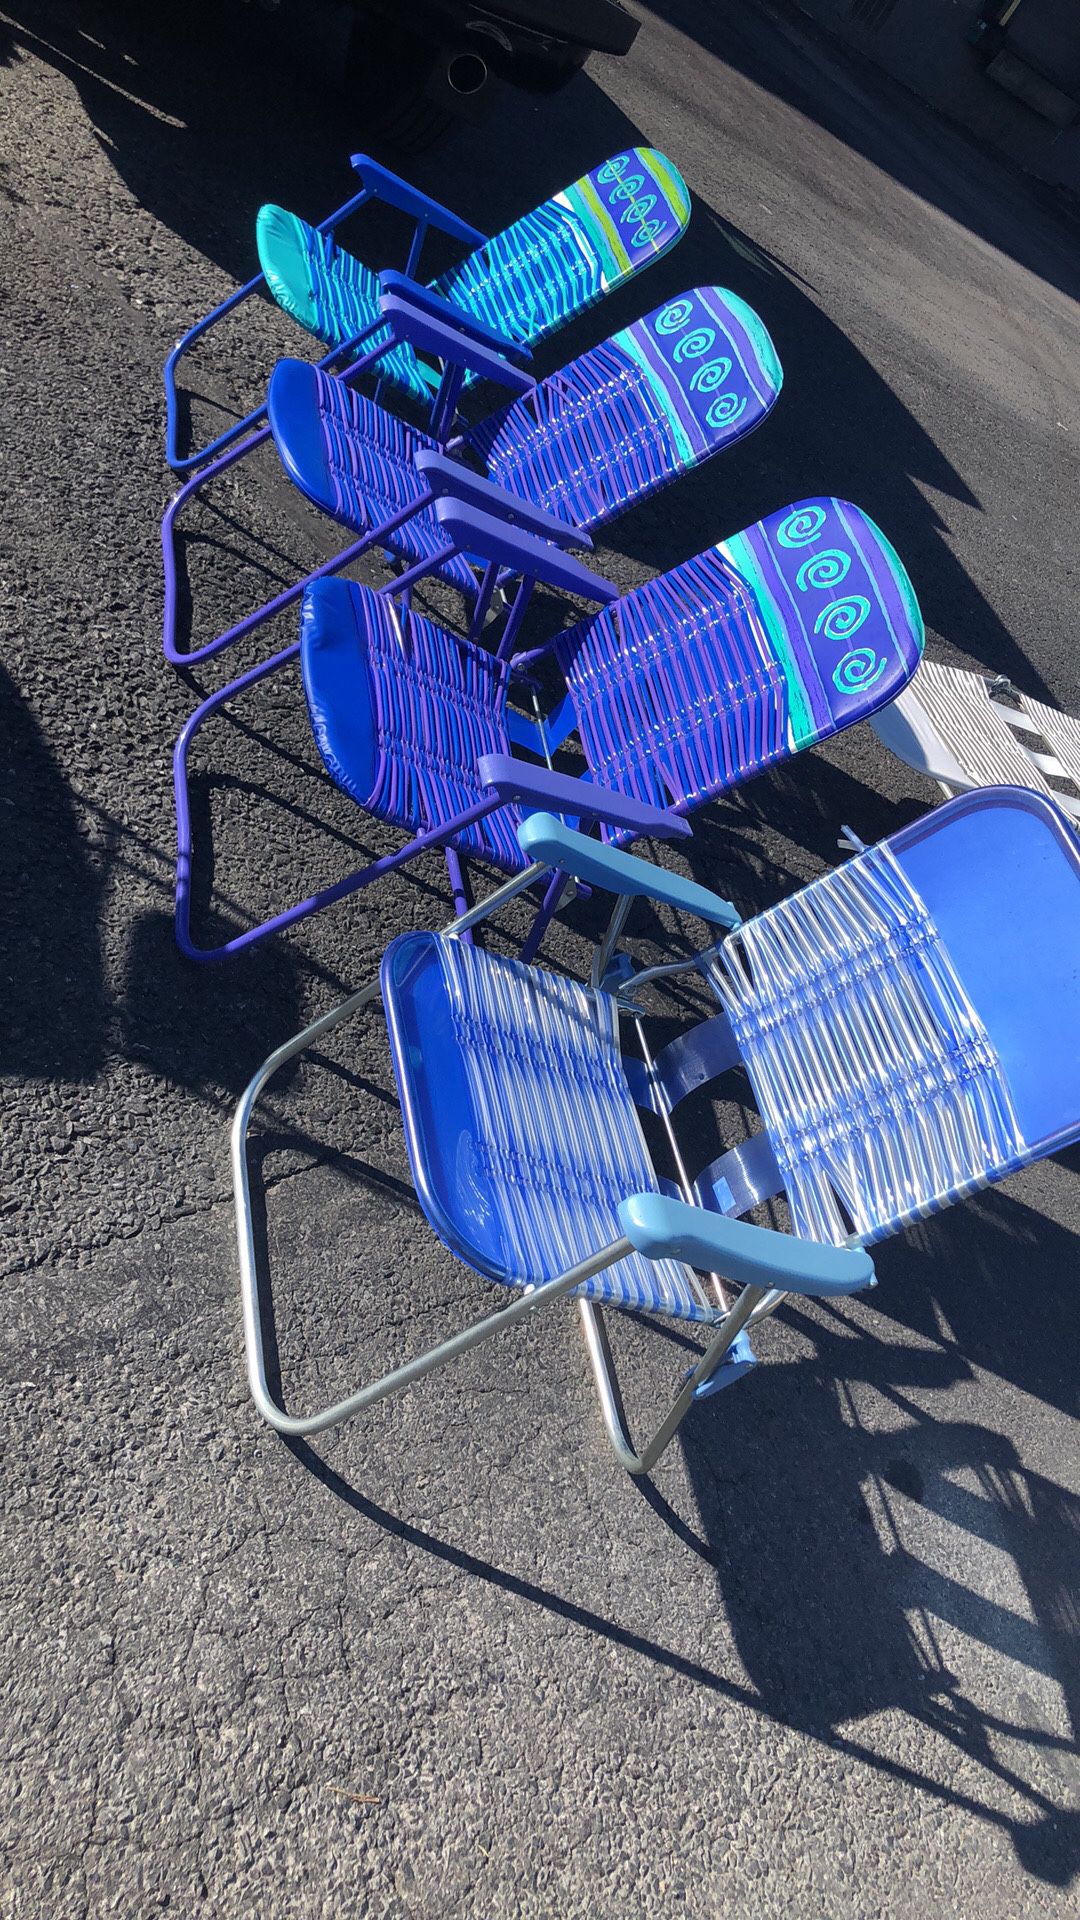 4 Good condition folding chairs